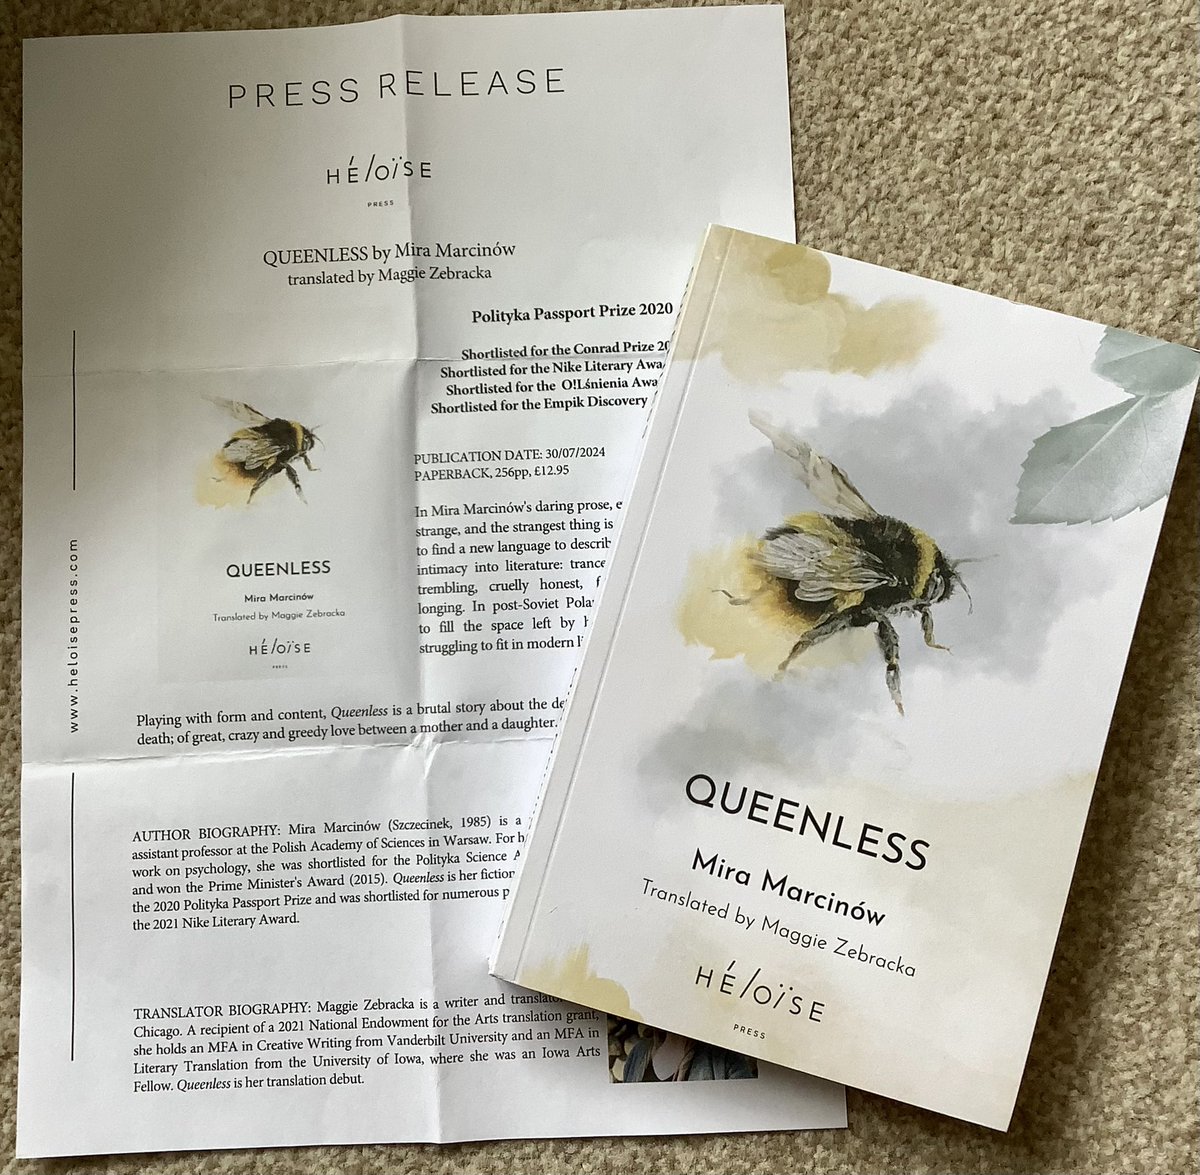 📮📮BOOK POST📮📮 Many thanks to @HeloisePress for this stunning copy of #Queenless by Mira Marcinow translated by @zebracka Published 30 July It sounds like a fascinating piece of literary fiction.